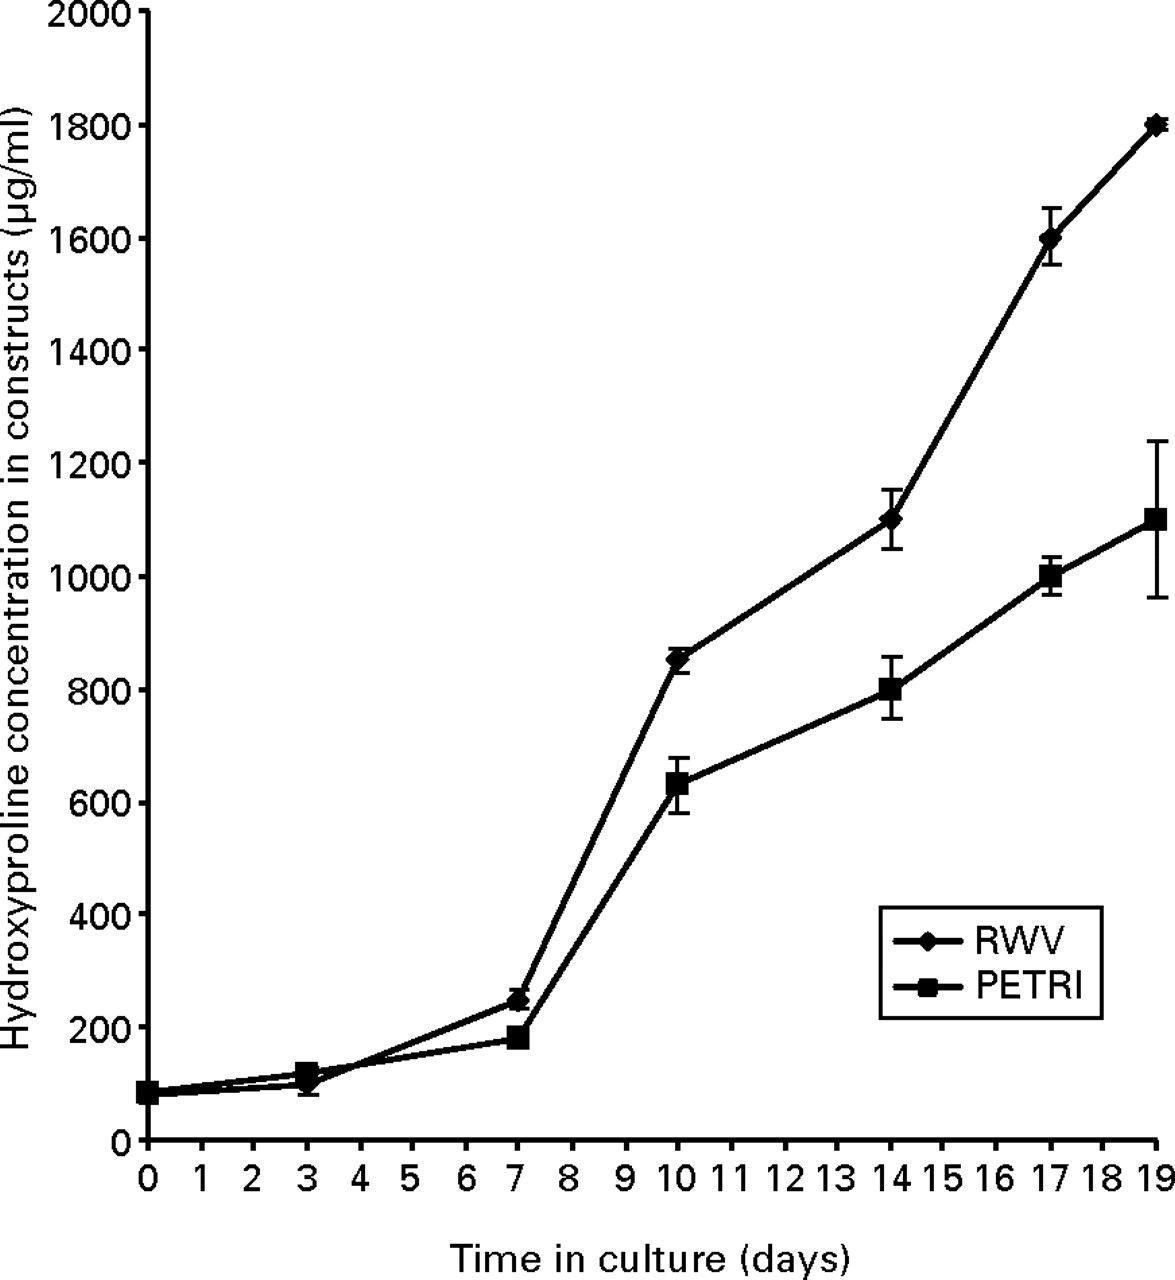 Fig. 3a, Fig. 3b  
            Graphs showing the total hydroxyproline content of a) bovine chondrocyte-seeded alginate bead constructs and b) human chondrocyte-seeded alginate bead constructs, cultured for 19 days in a rotating wall vessel (RWV) bioreactor and a static petri culture dish.
          